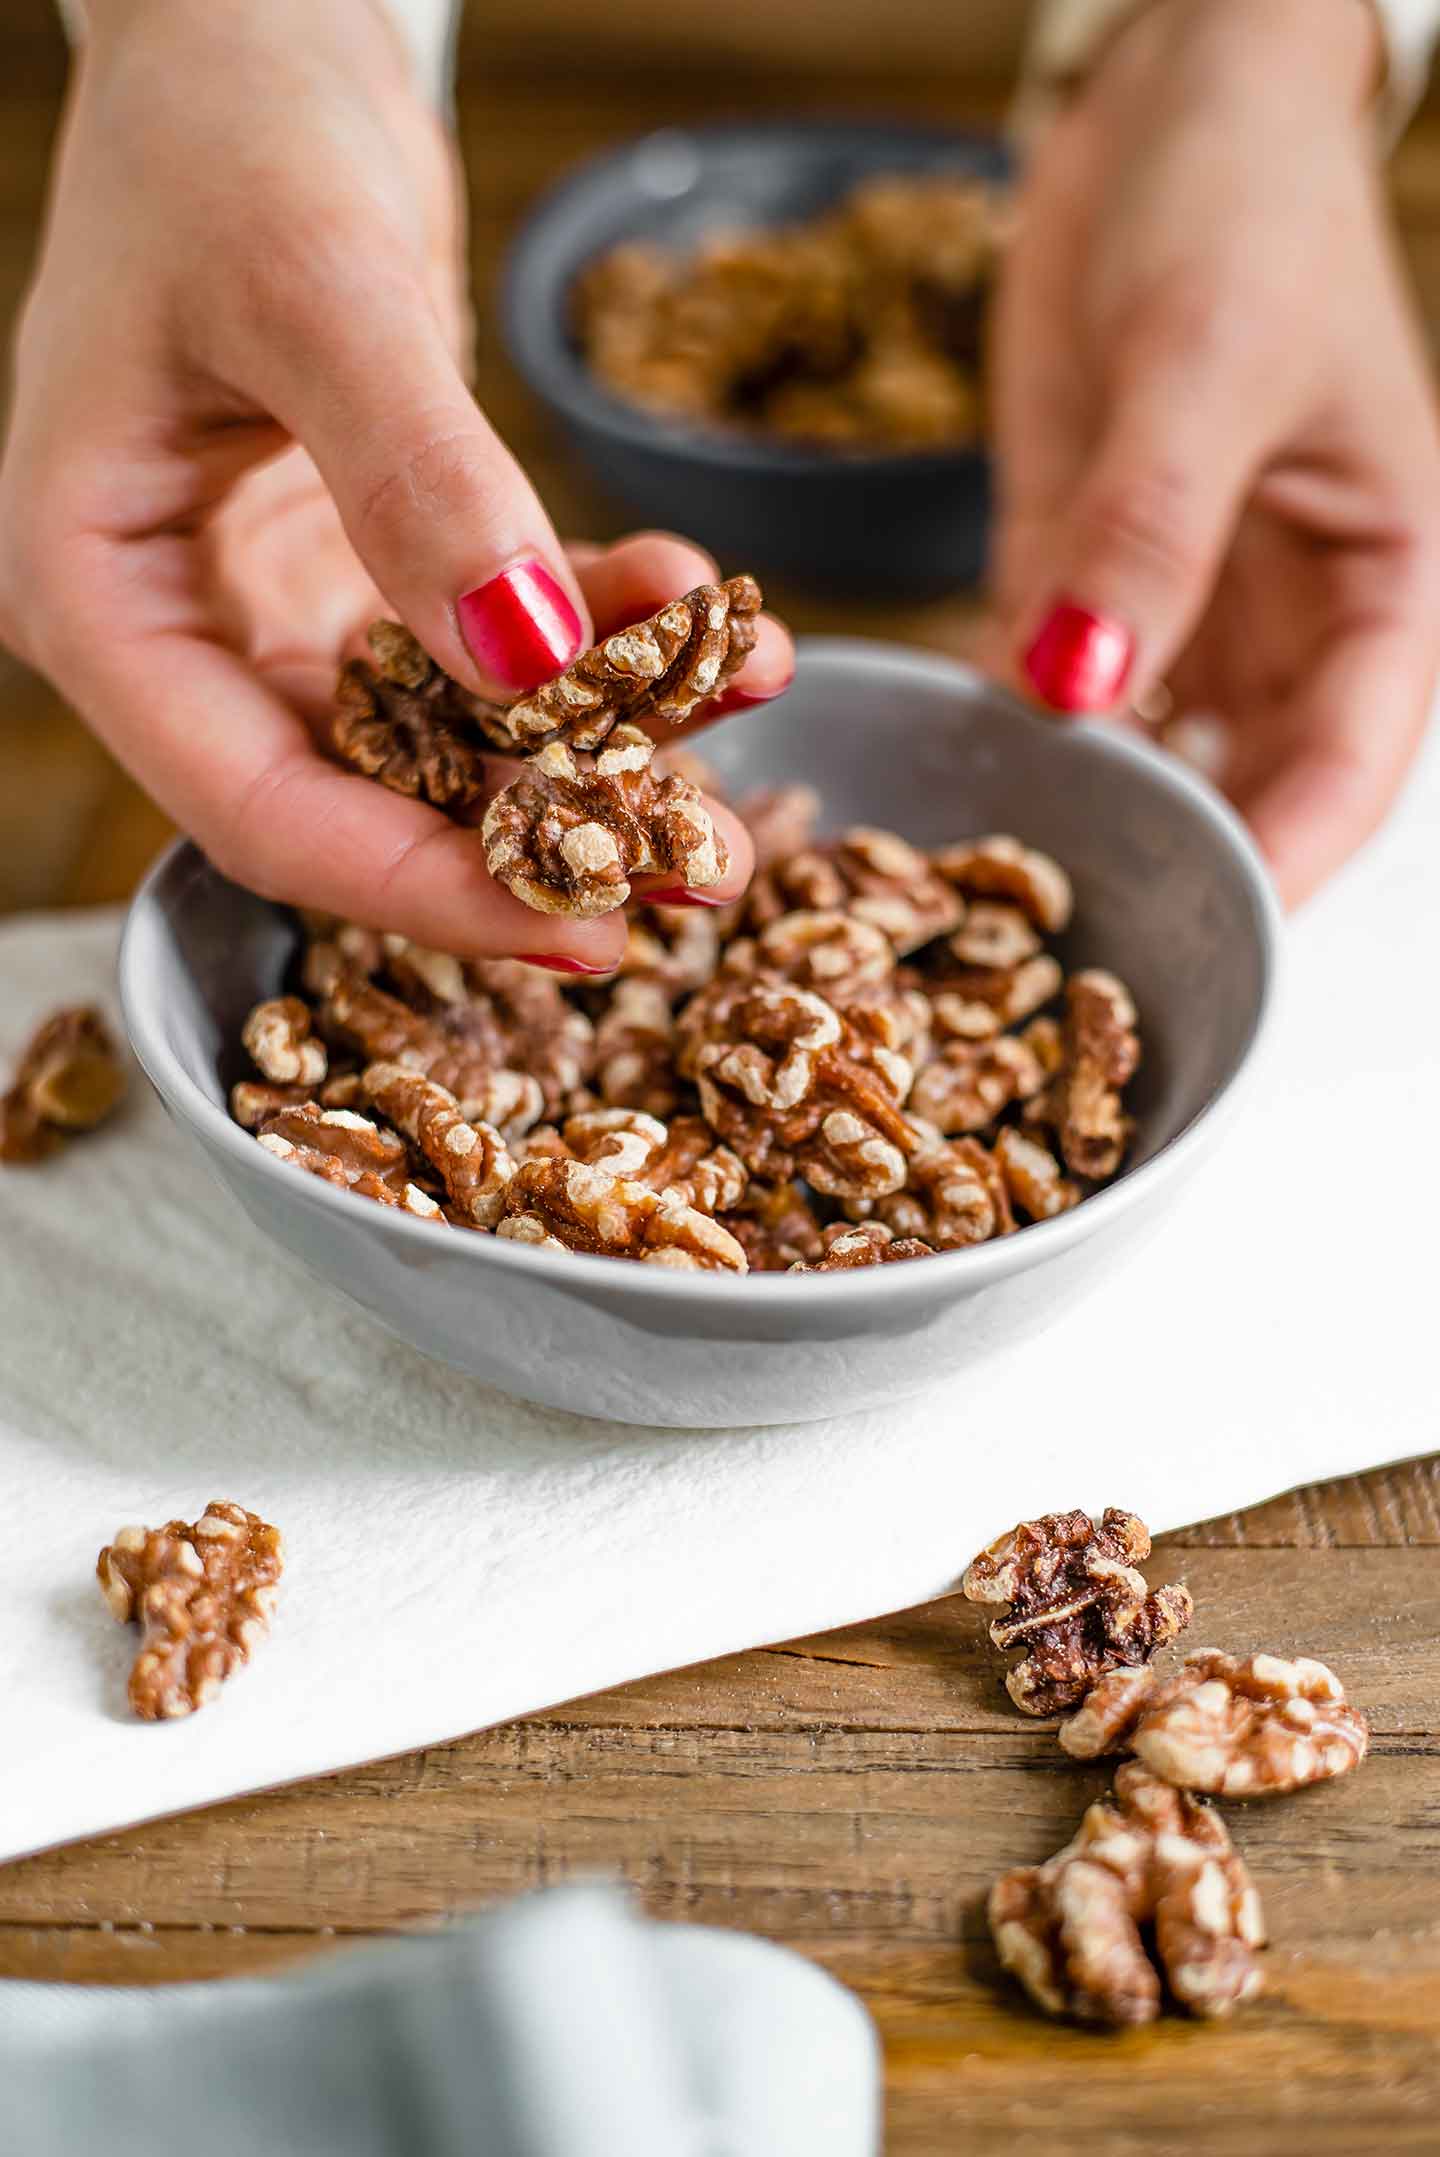 Side view of a hand holding toasted walnuts. Raw walnuts are in the background and loose walnuts are scattered around on the wooden table.